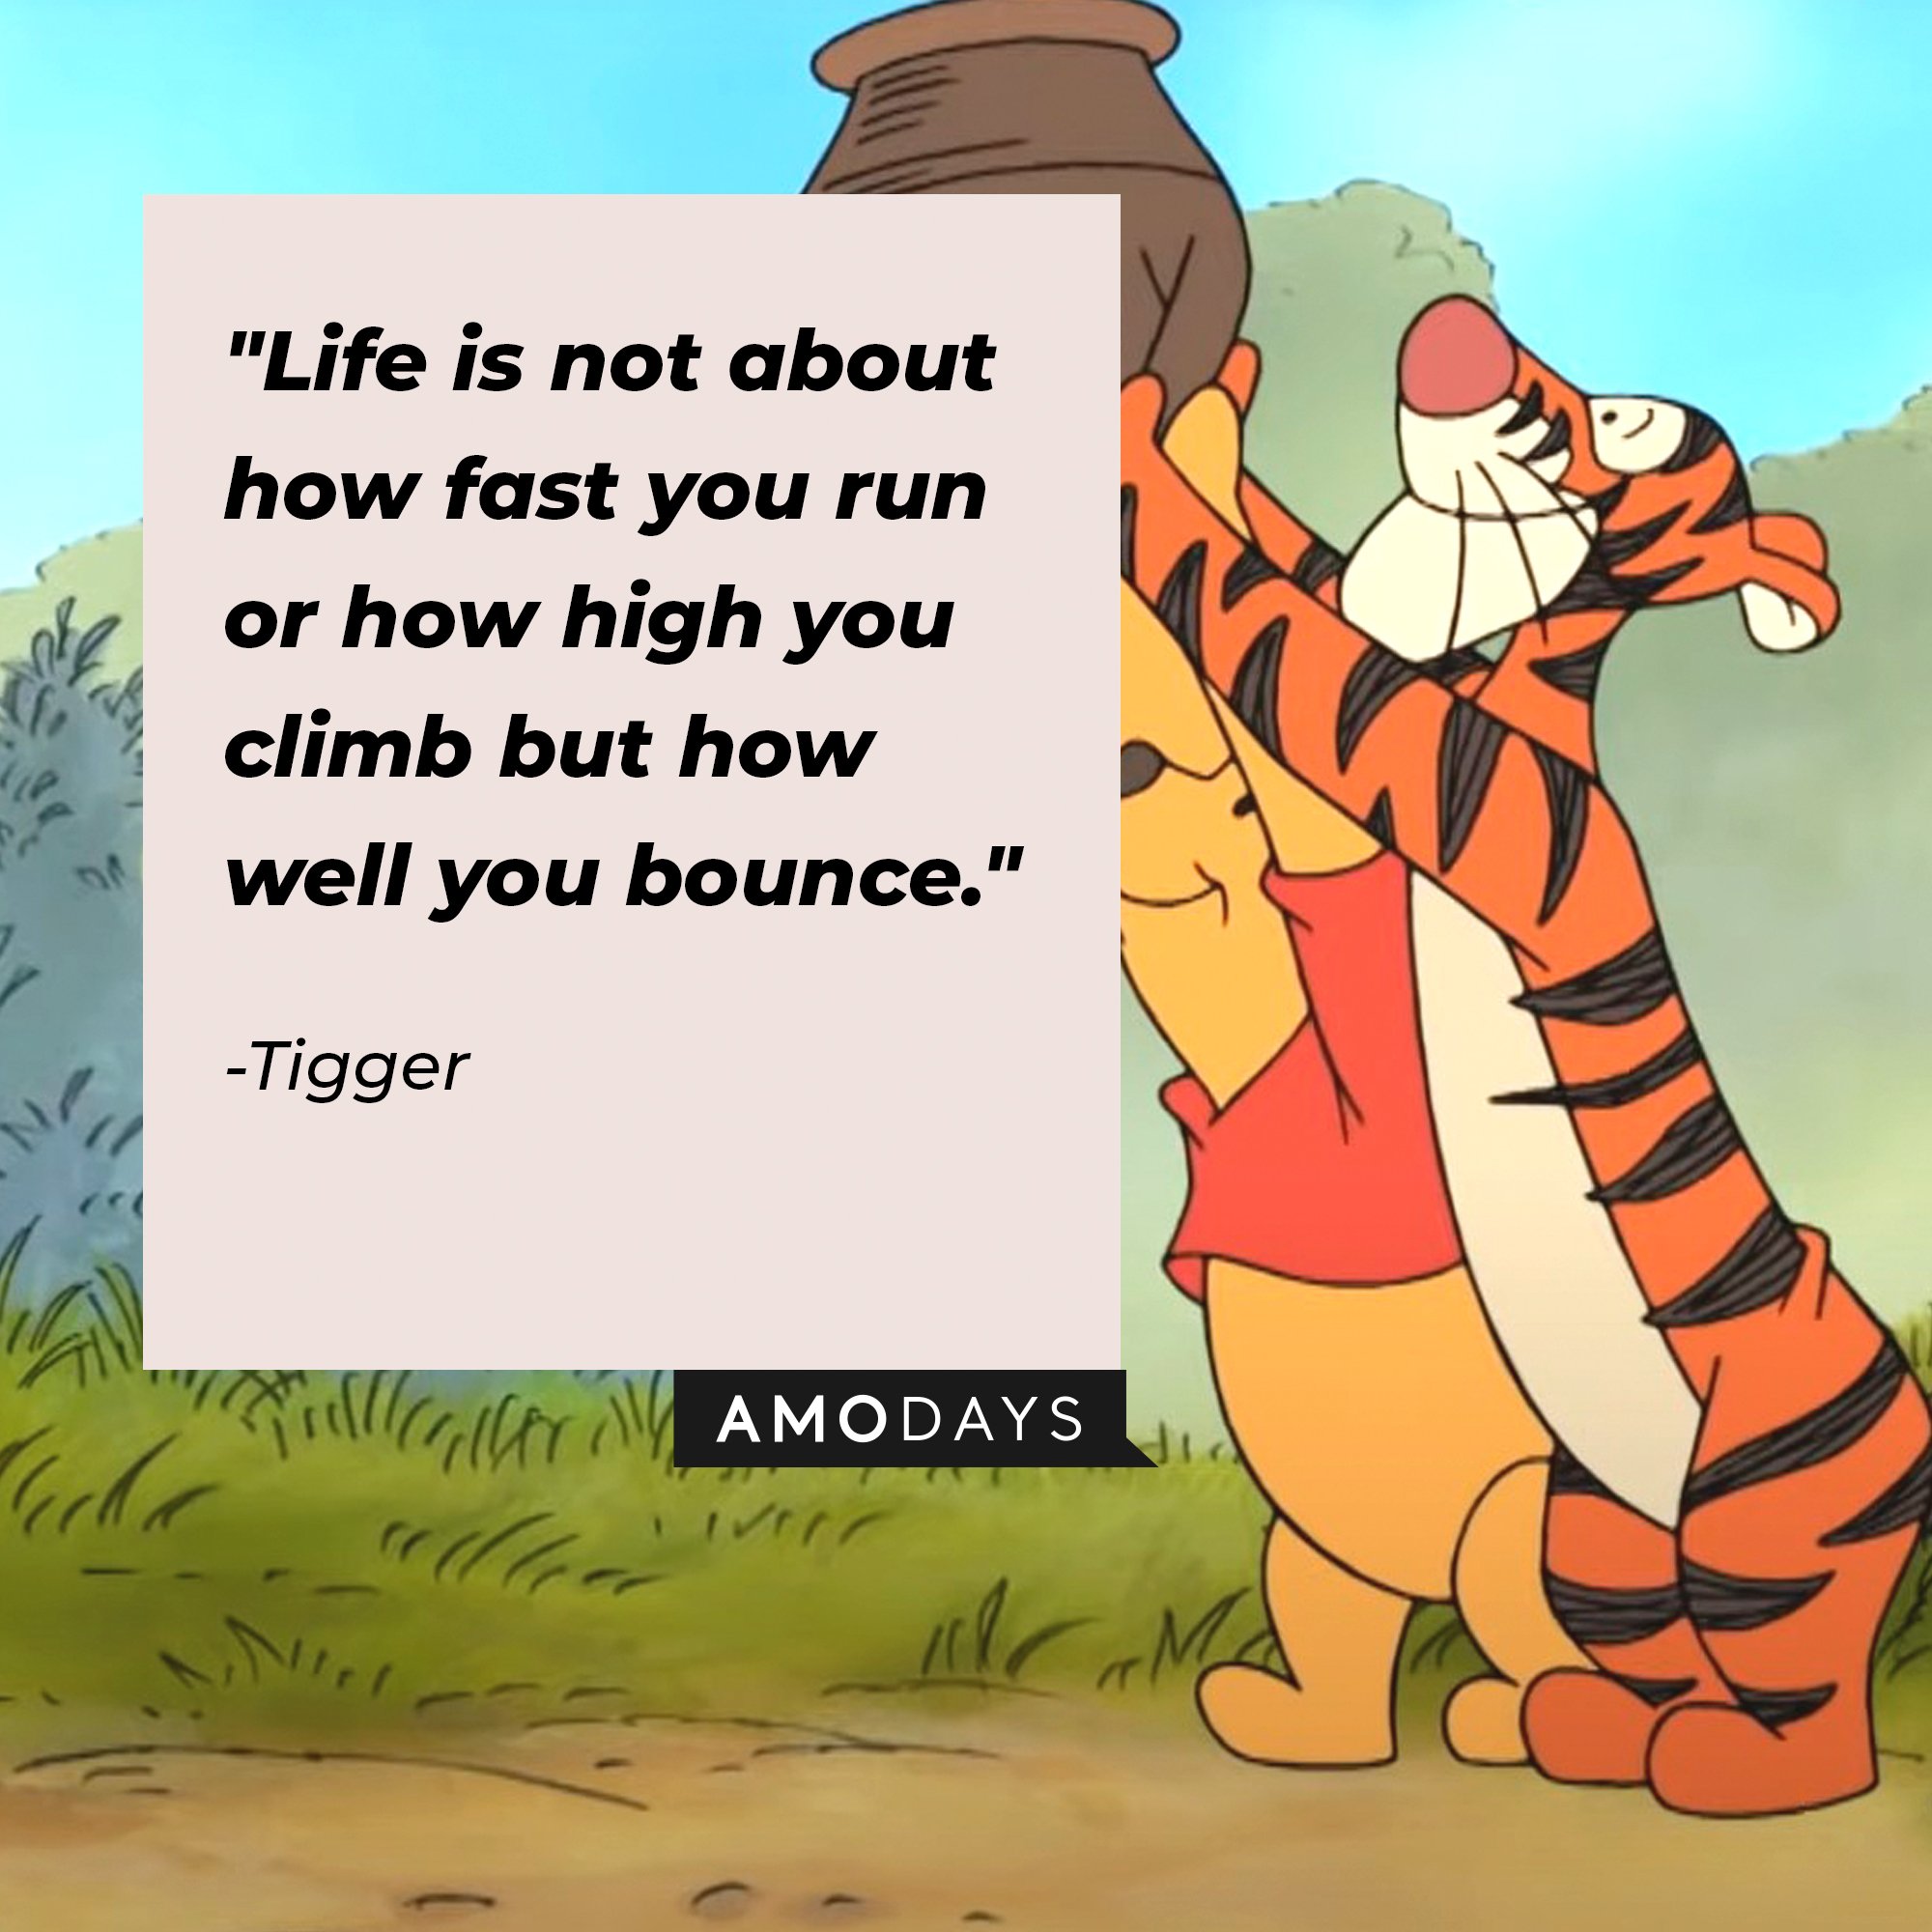 Tigger's quote: "Life is not about how fast you run or how high you climb but how well you bounce." | Image: AmoDays